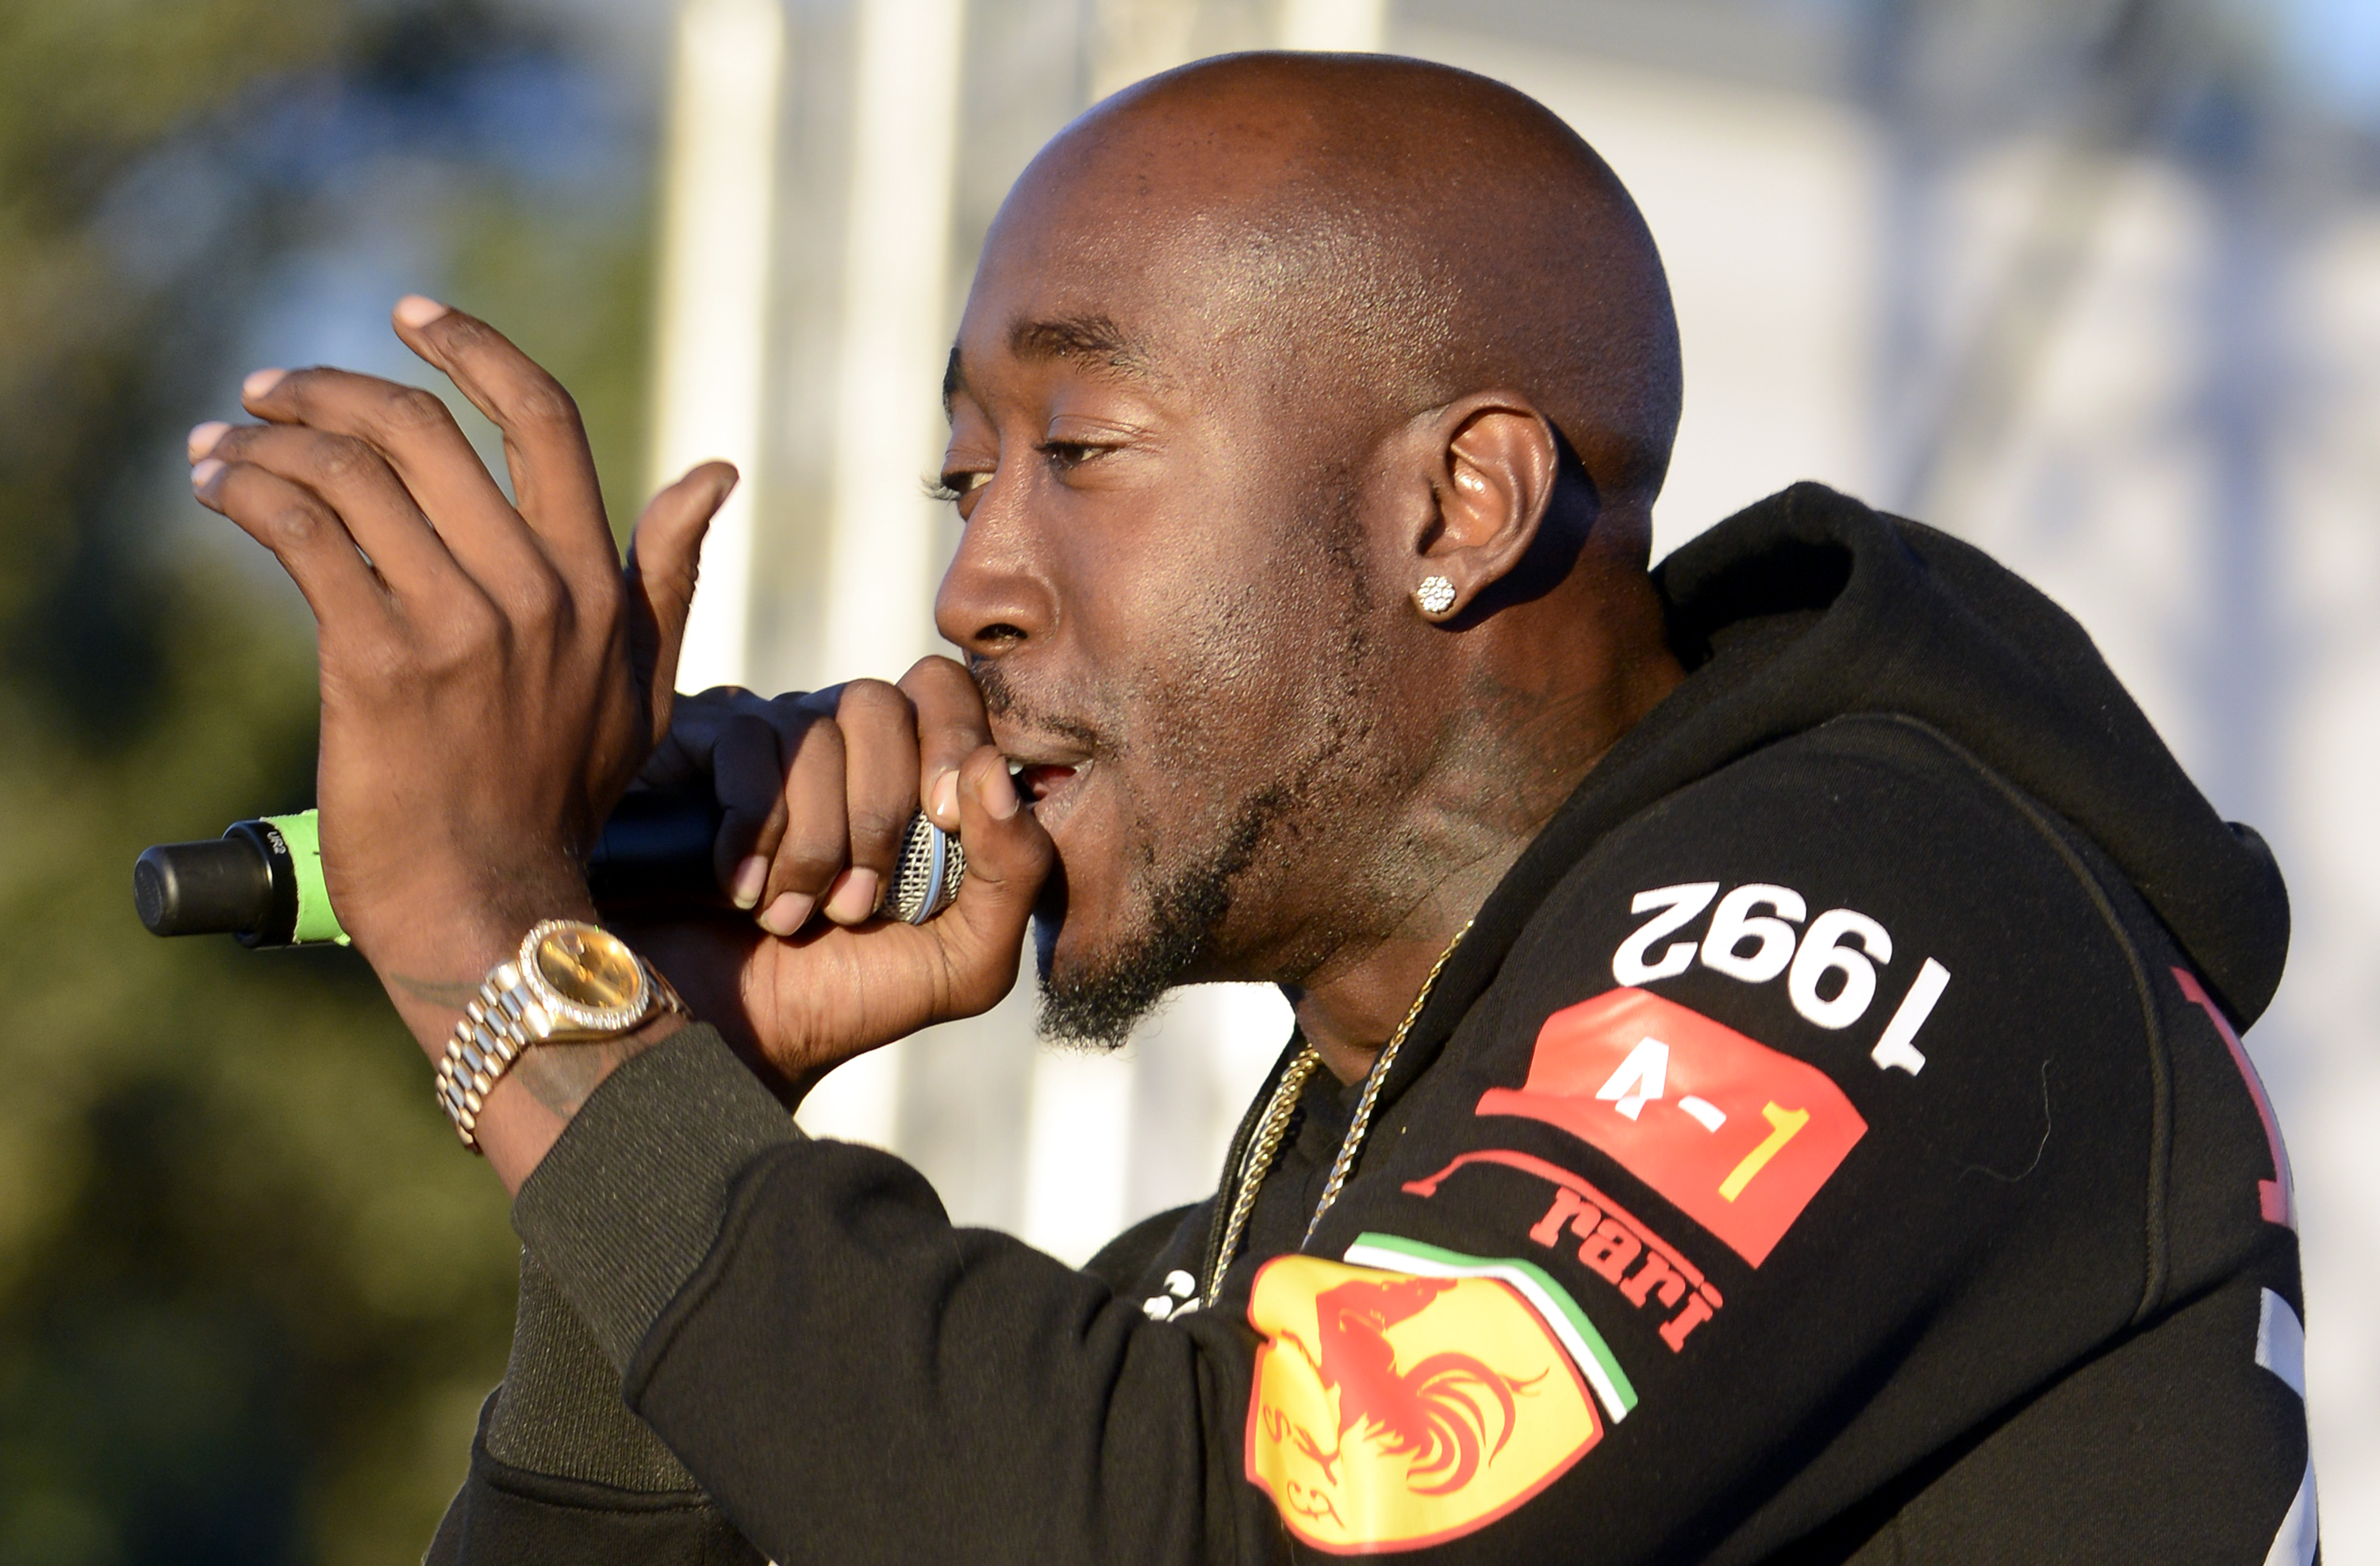 Freddie Gibbs Admits He Has A Fake IG Account To “Taunt People”